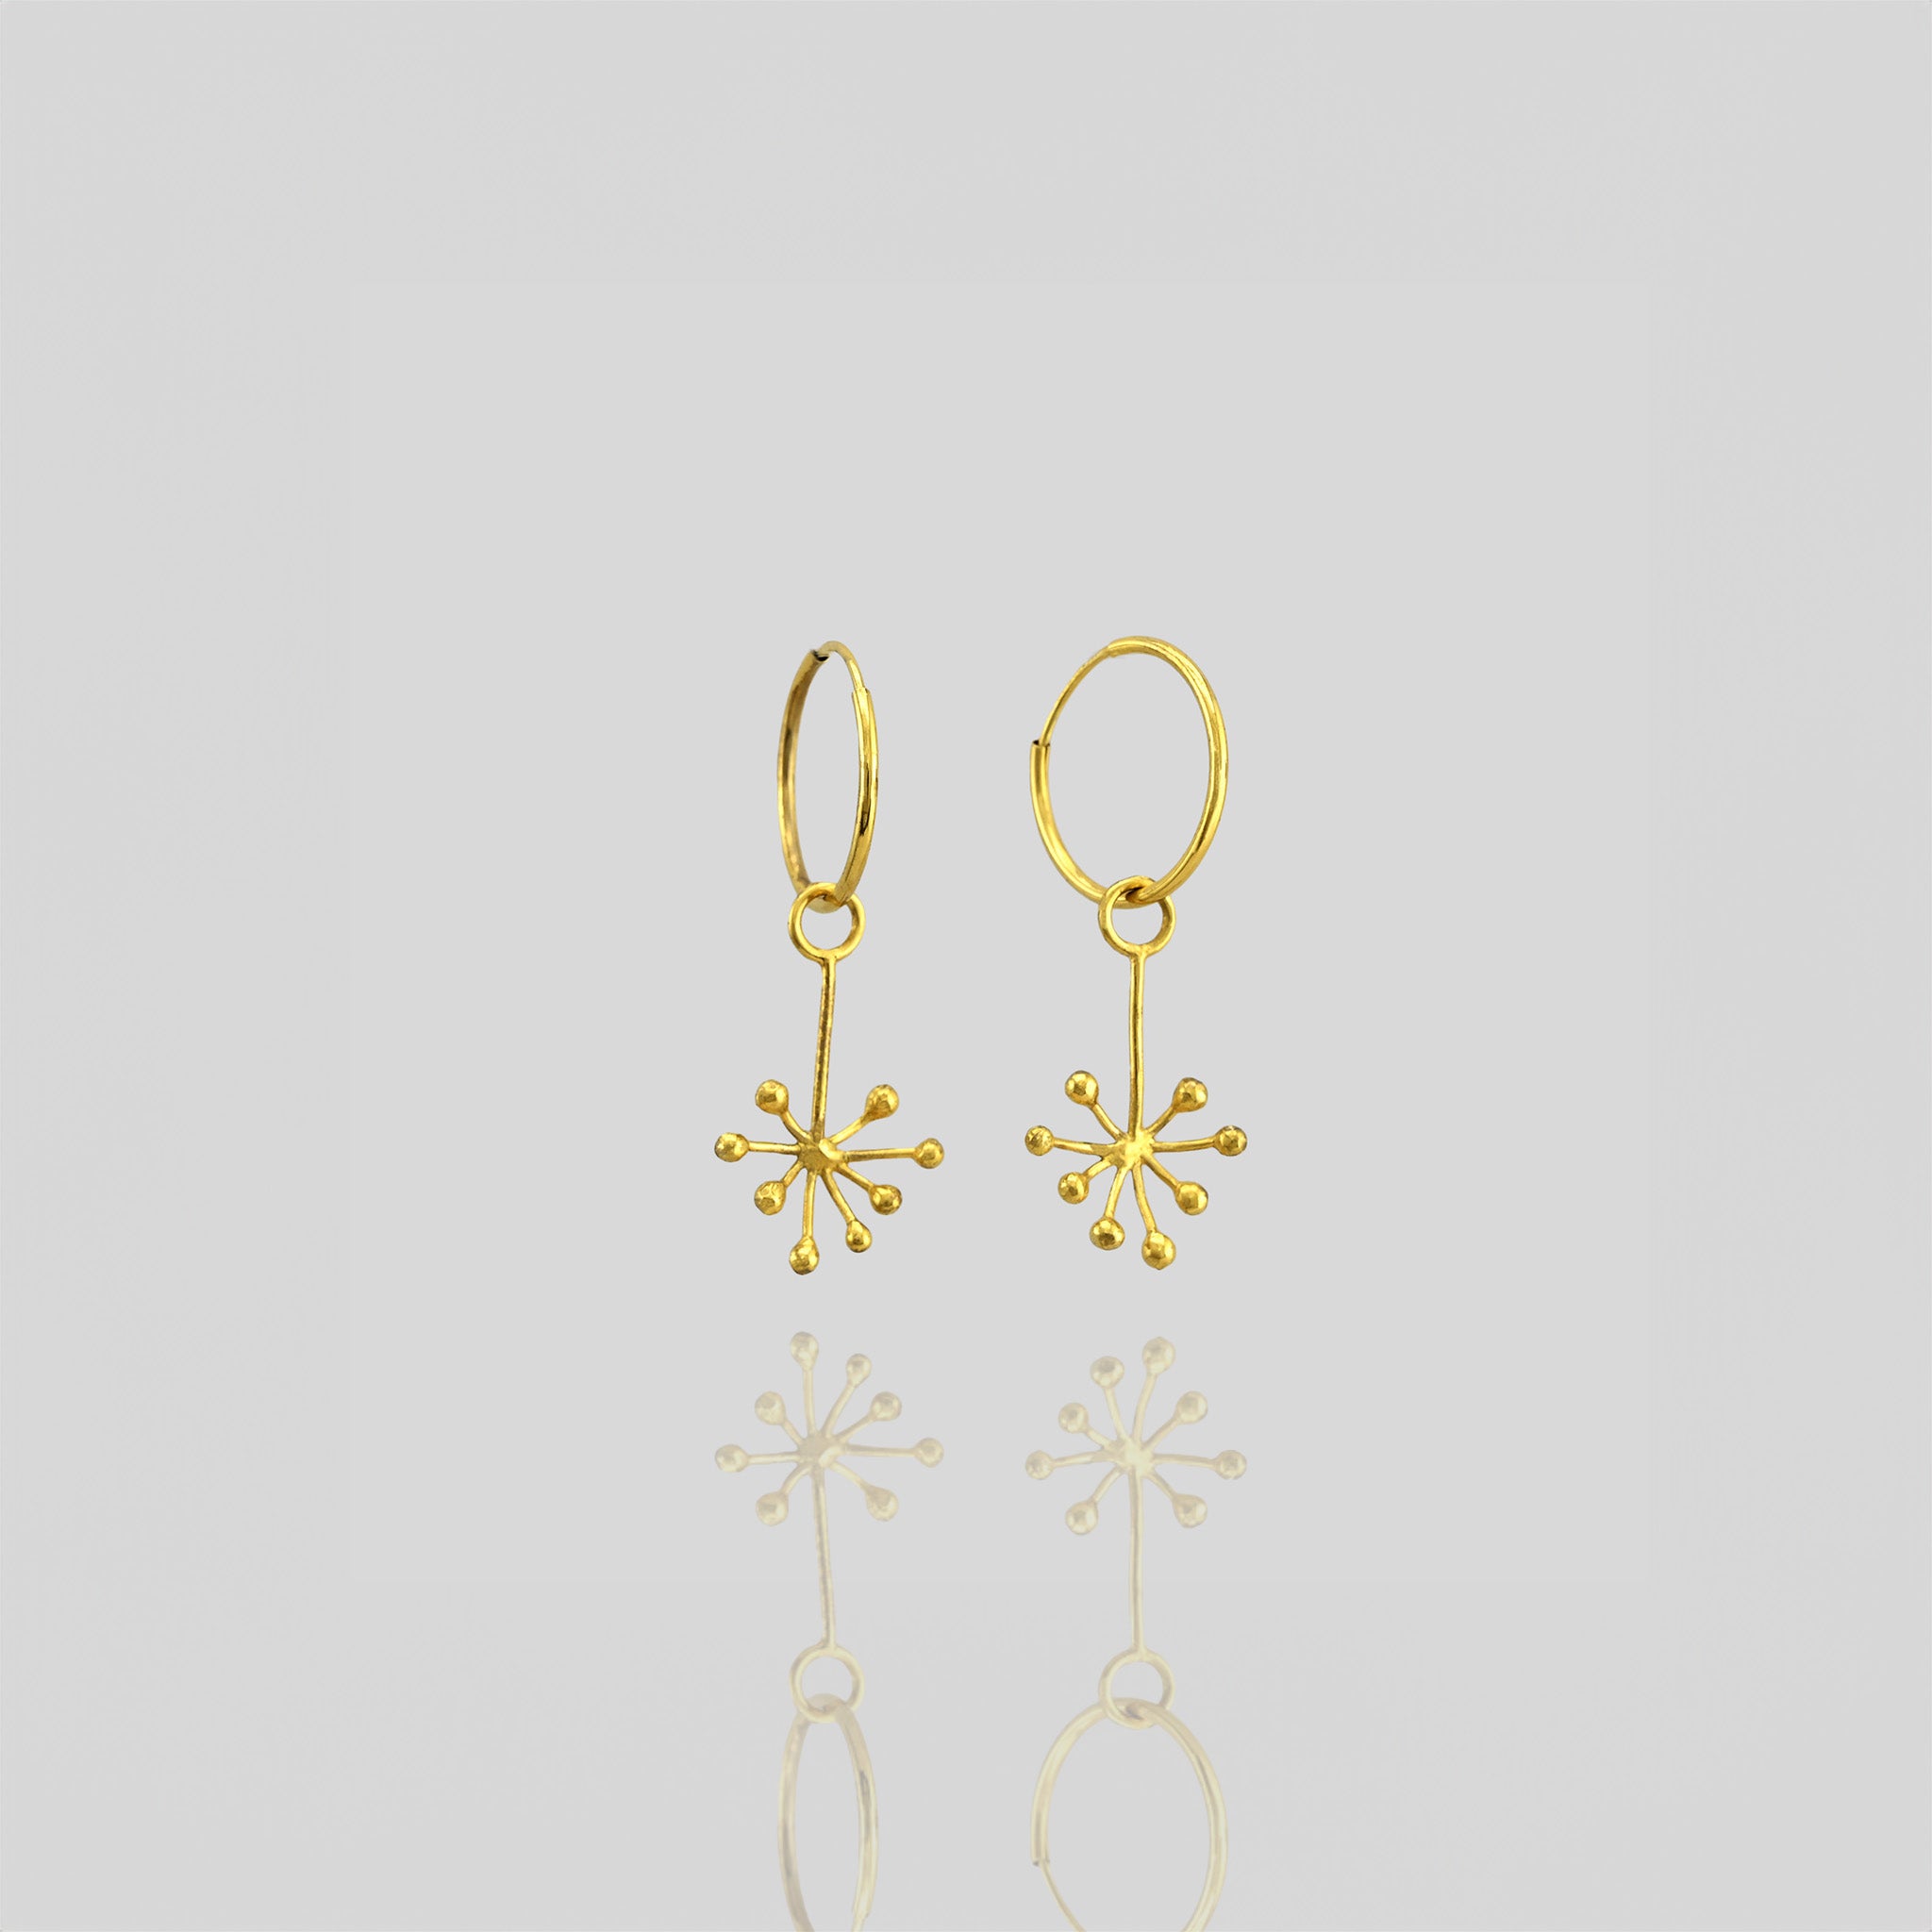 Delicate 18k yellow gold earrings featuring an intricate snowflake design formed by thin, radiating gold lines. The design exudes a subtle yet playful aesthetic.